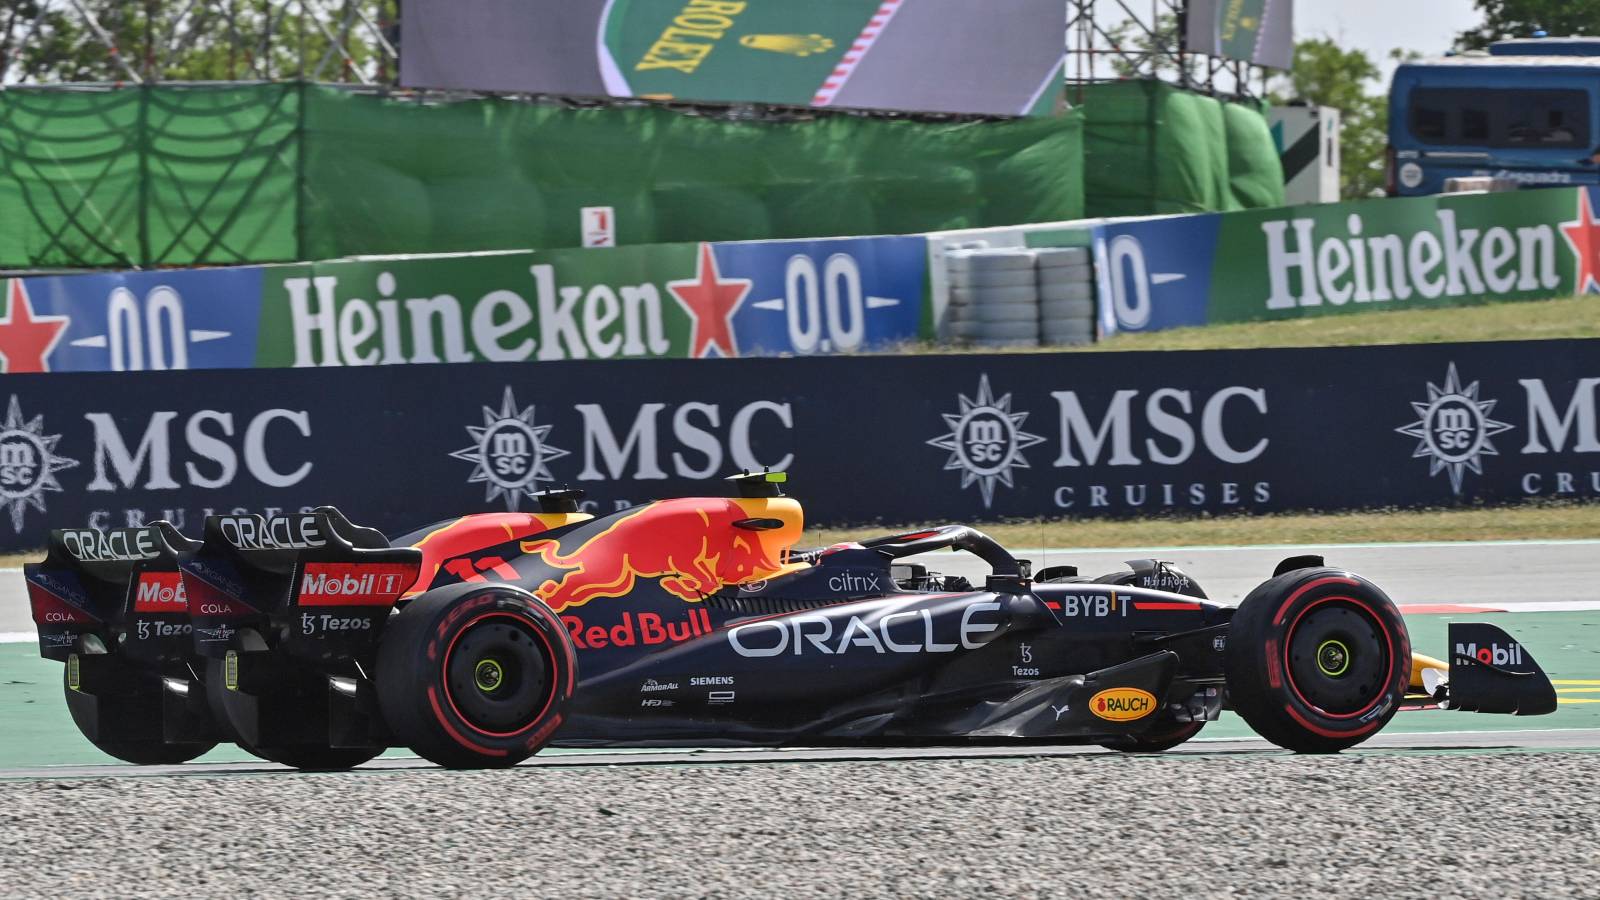 Max Verstappen and Sergio Perez, Red Bull, side-by-side. Spain, May 2022.